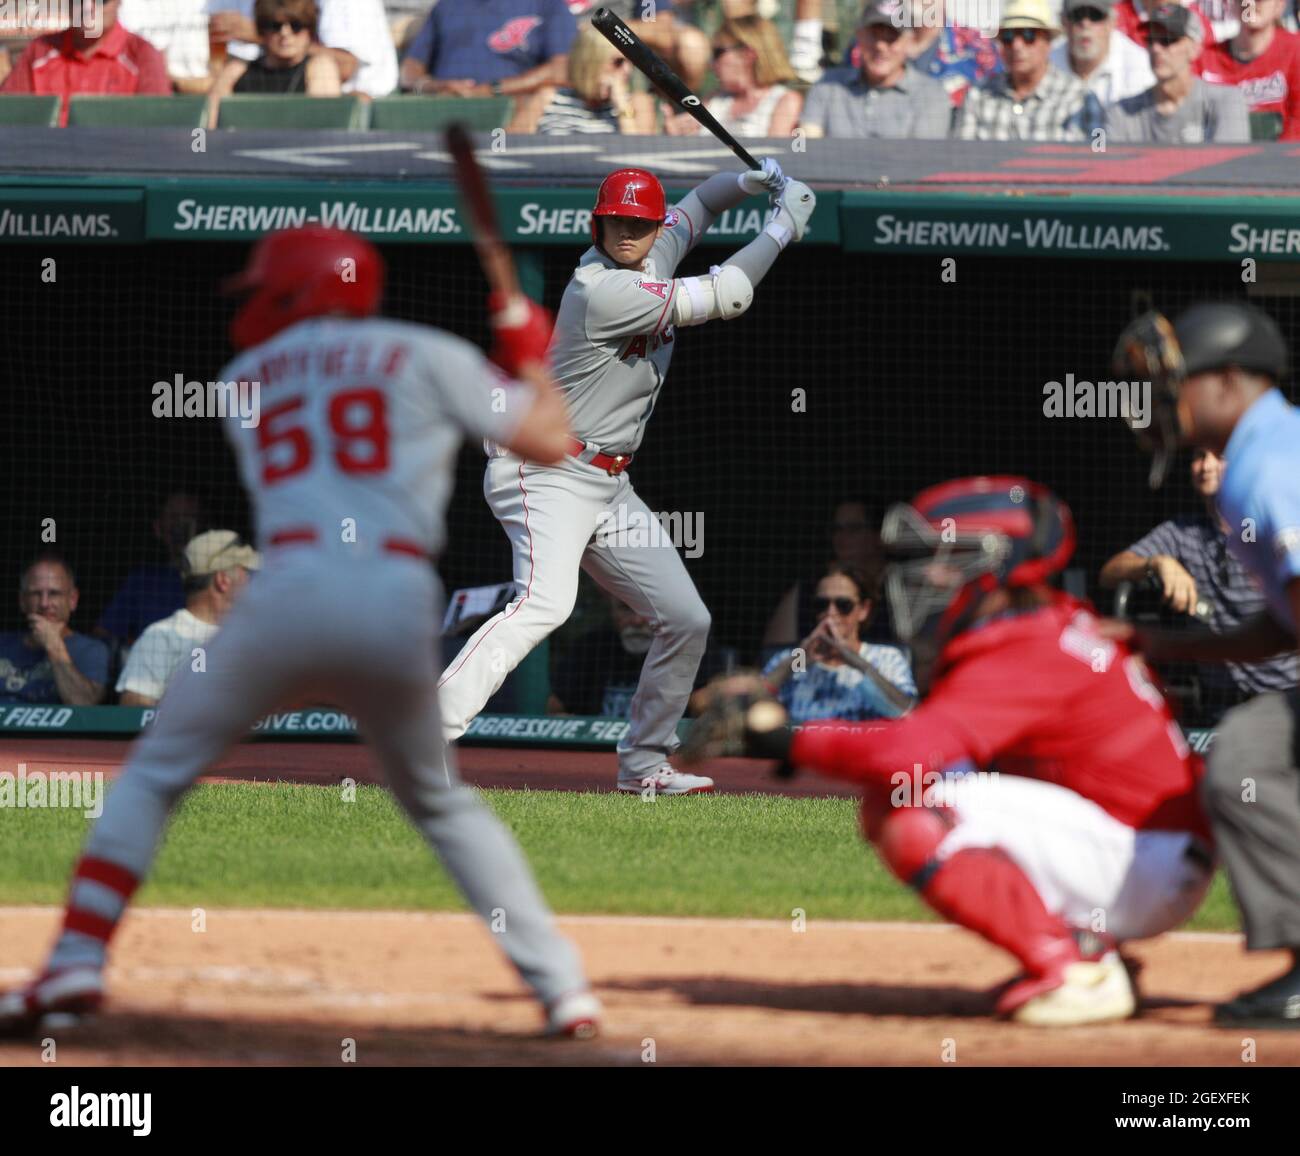 Cleveland, United States. 21st Aug, 2021. Los Angeles Angels Shohei Ohtani (17) prepares to bat in the third inning against the Cleveland Indians at Progressive Field in Cleveland, Ohio on Saturday, August 21, 2021. Photo by Aaron Josefczyk/UPI Credit: UPI/Alamy Live News Stock Photo